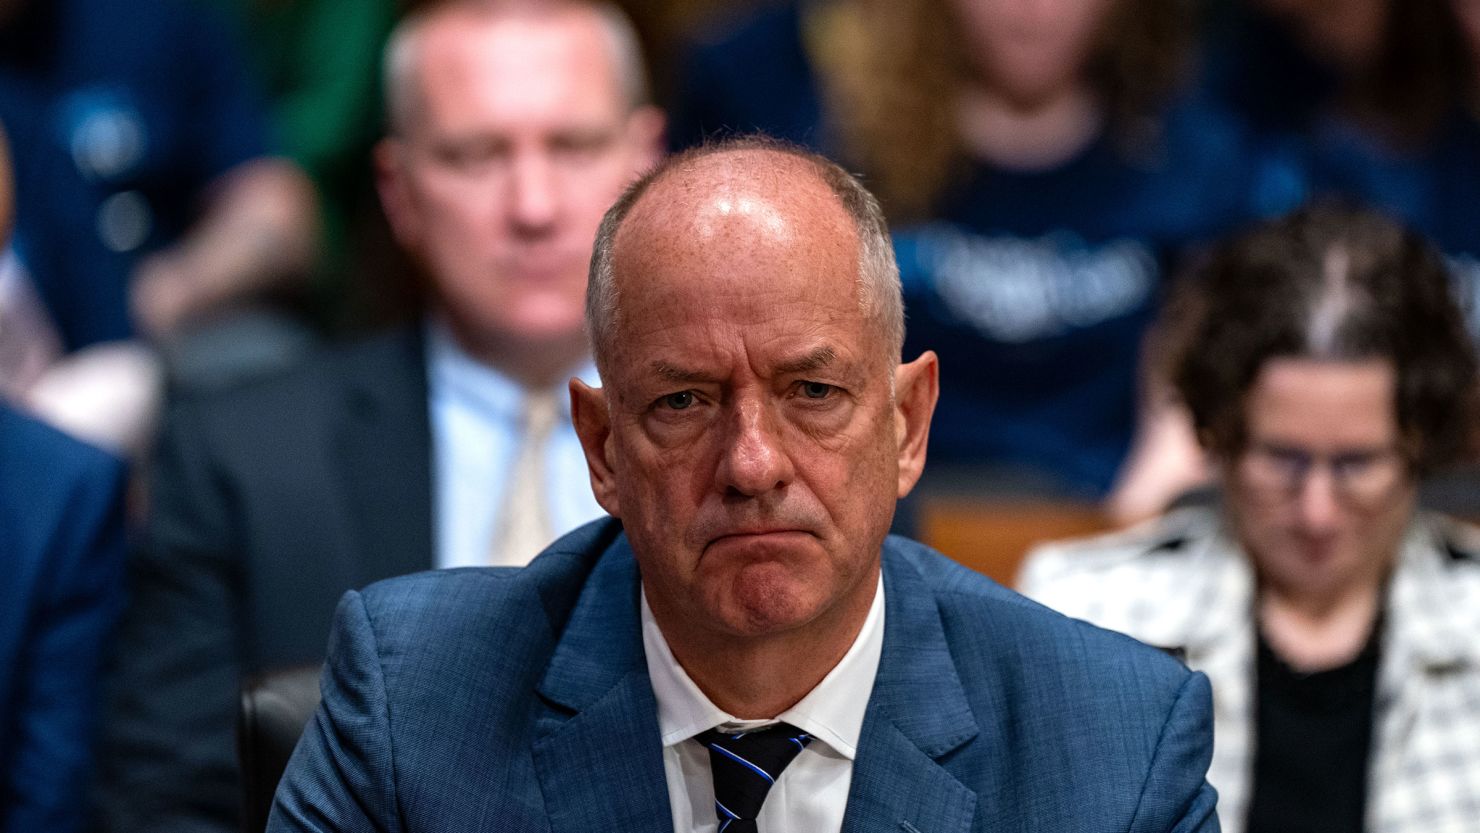 UnitedHealth CEO Andrew Witty testifies before the Senate Finance Committee on Capitol Hill in Washington, DC, on May 1, 2024. In February, hackers stole health and personal data of what UnitedHealth says is "potentially a substantial proportion" of patient information from its systems.